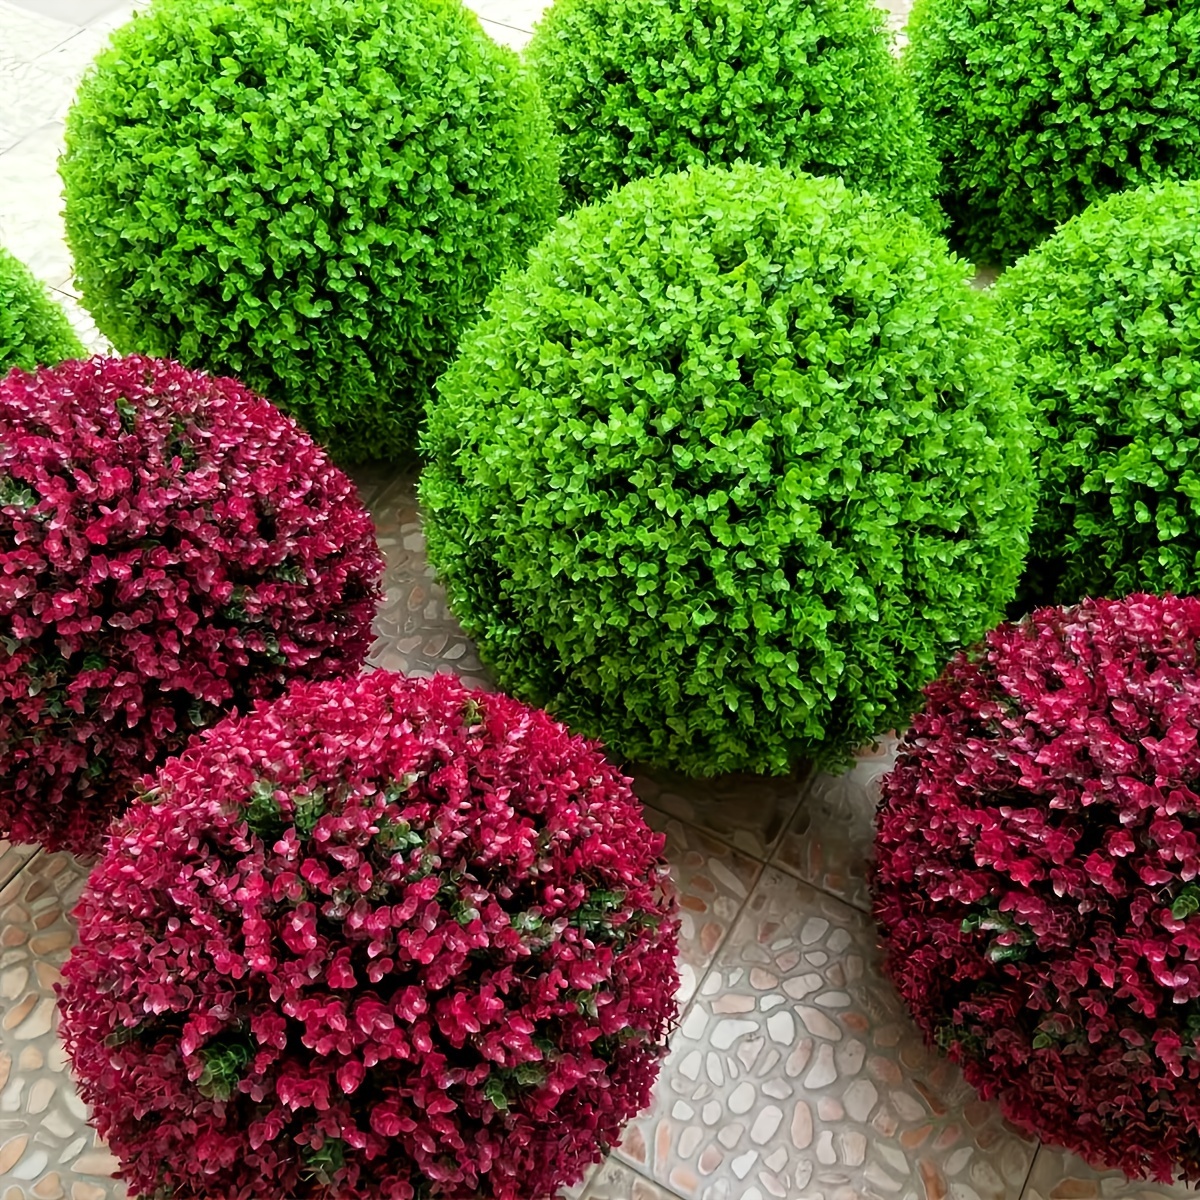 

2packs Artificial Plant Boxwood Topiary Balls, Uv Protected Faux Plants Decorative Balls For Outdoor Patio Garden Balcony Backyard And Indoor Home Wedding Decoration